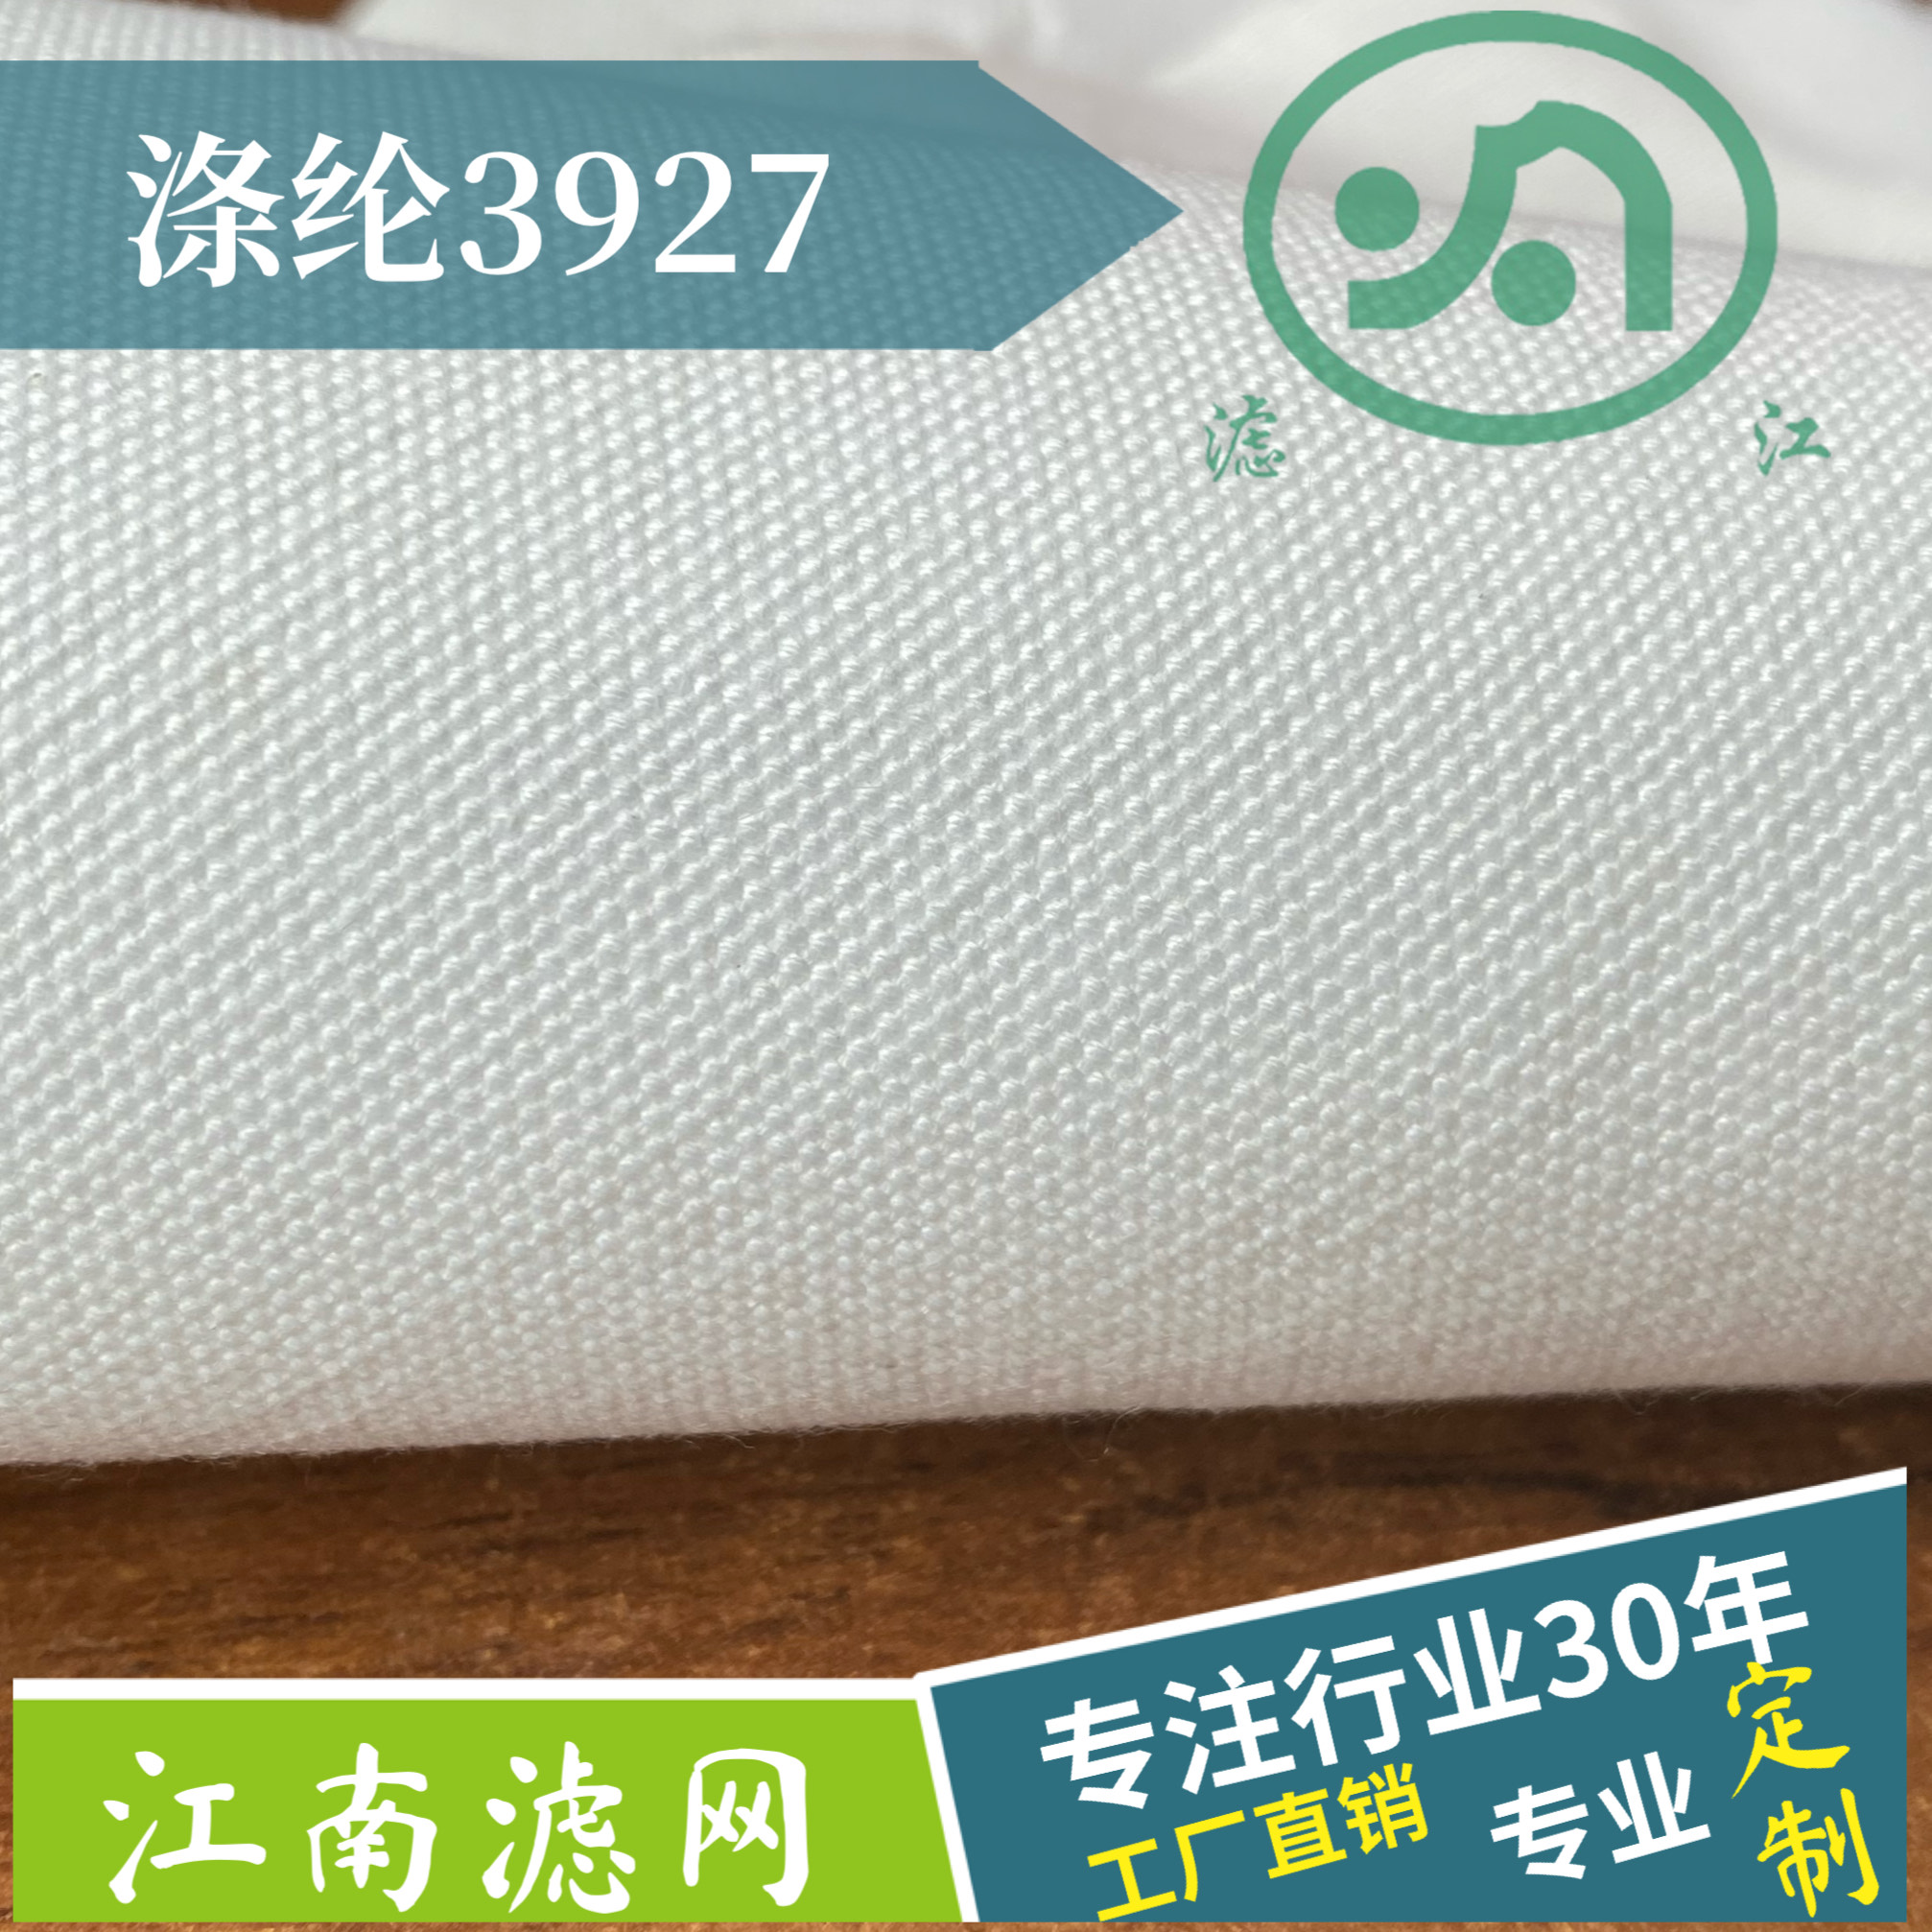 Polyester filter cloth 3927